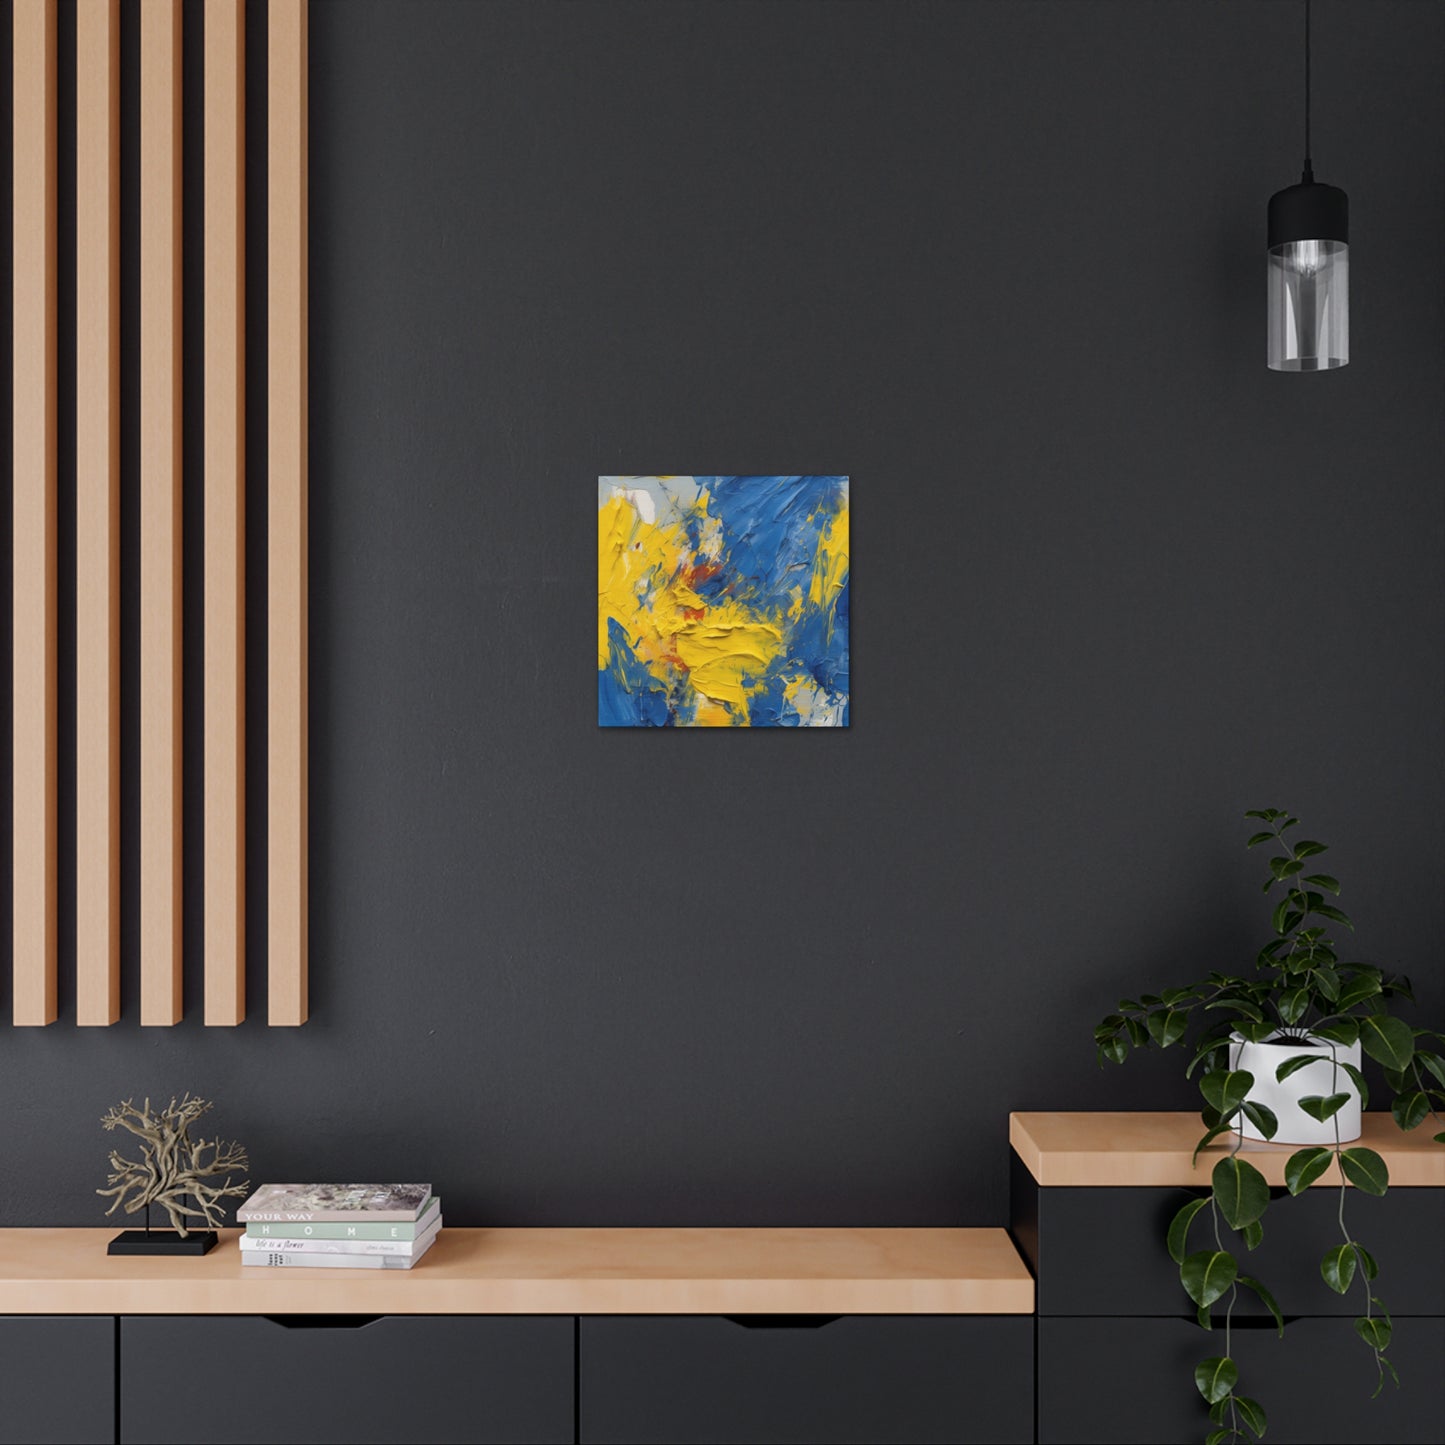 "Abstract Blue & Yellow" Wall Art - Weave Got Gifts - Unique Gifts You Won’t Find Anywhere Else!